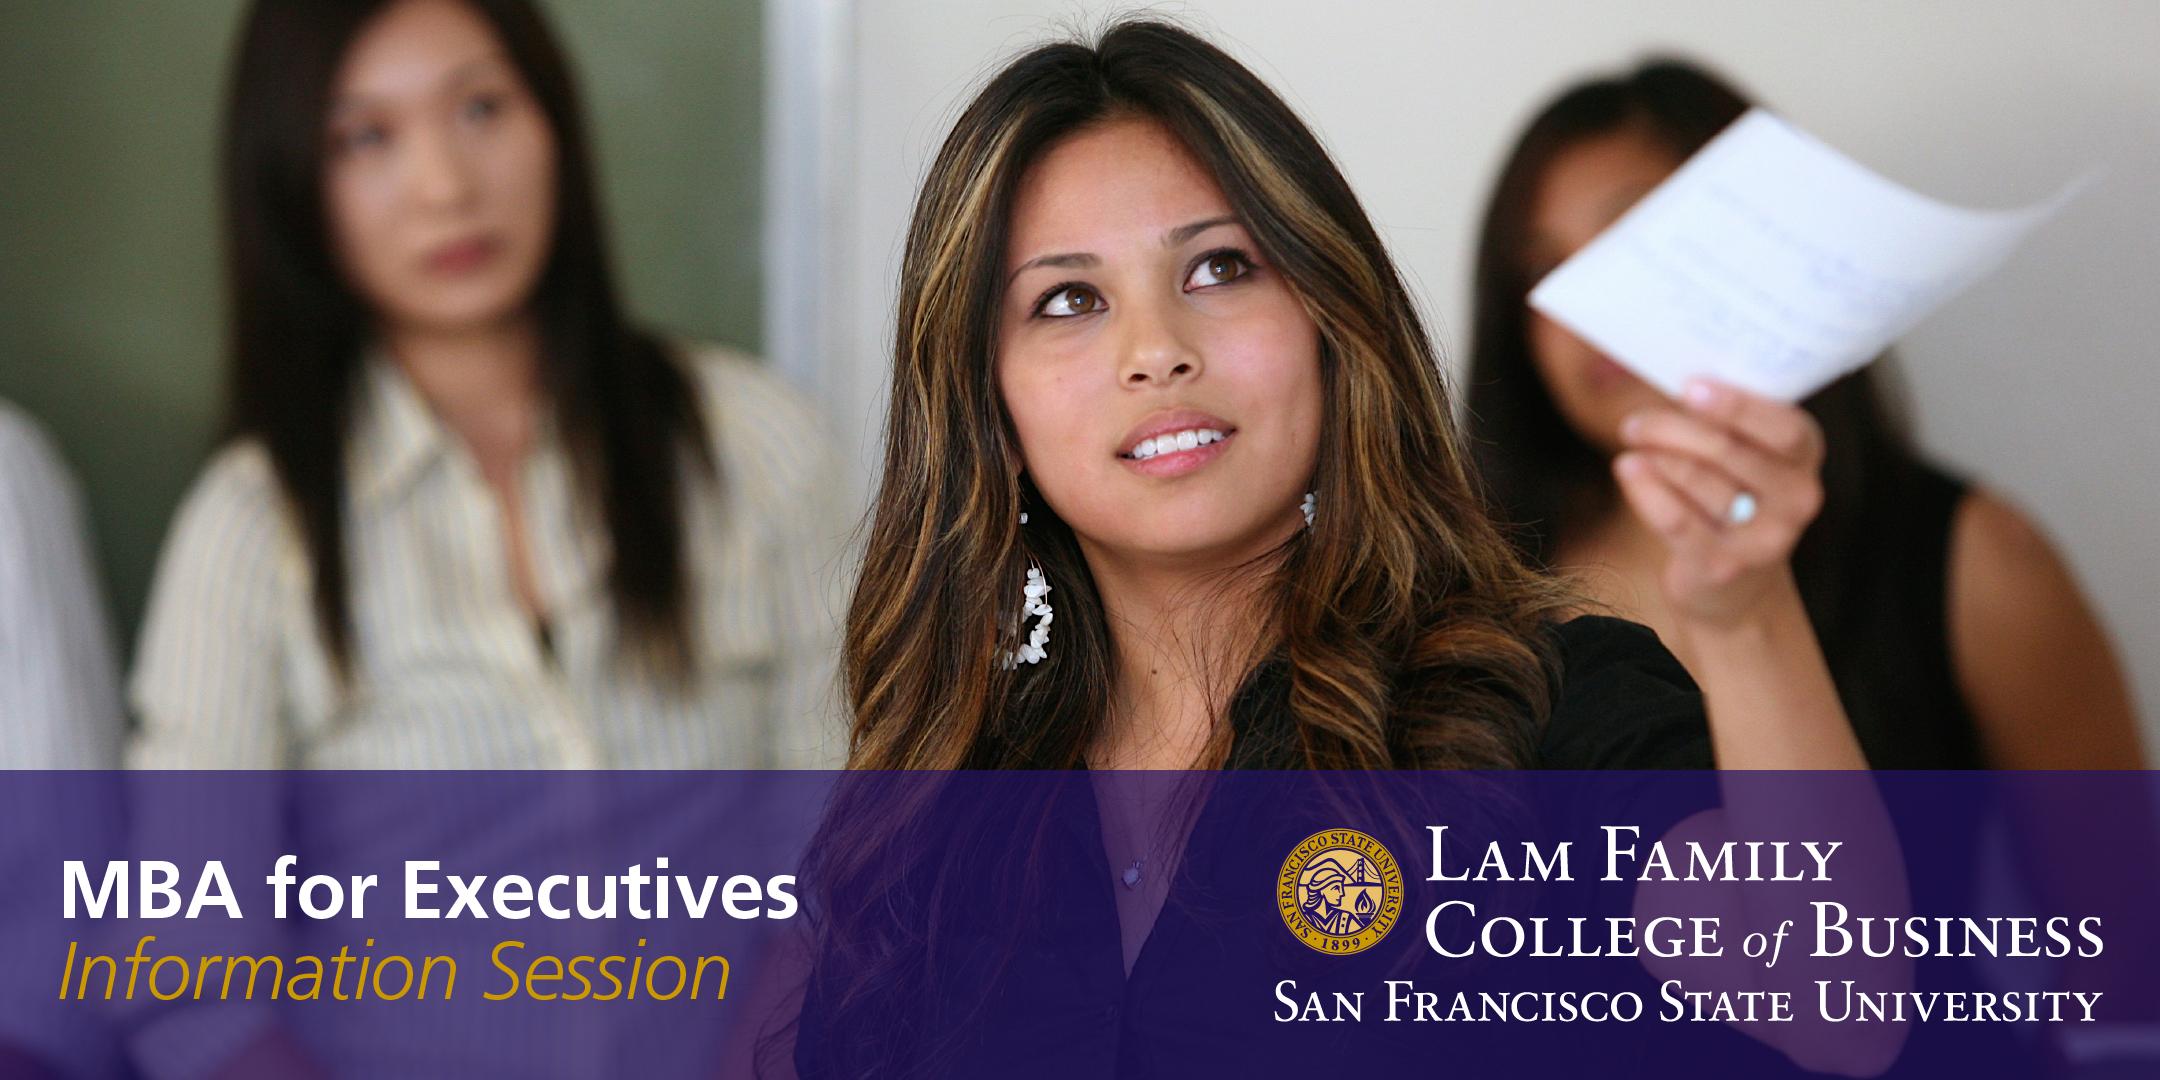 San Francisco State University - MBA for Executives Information Session